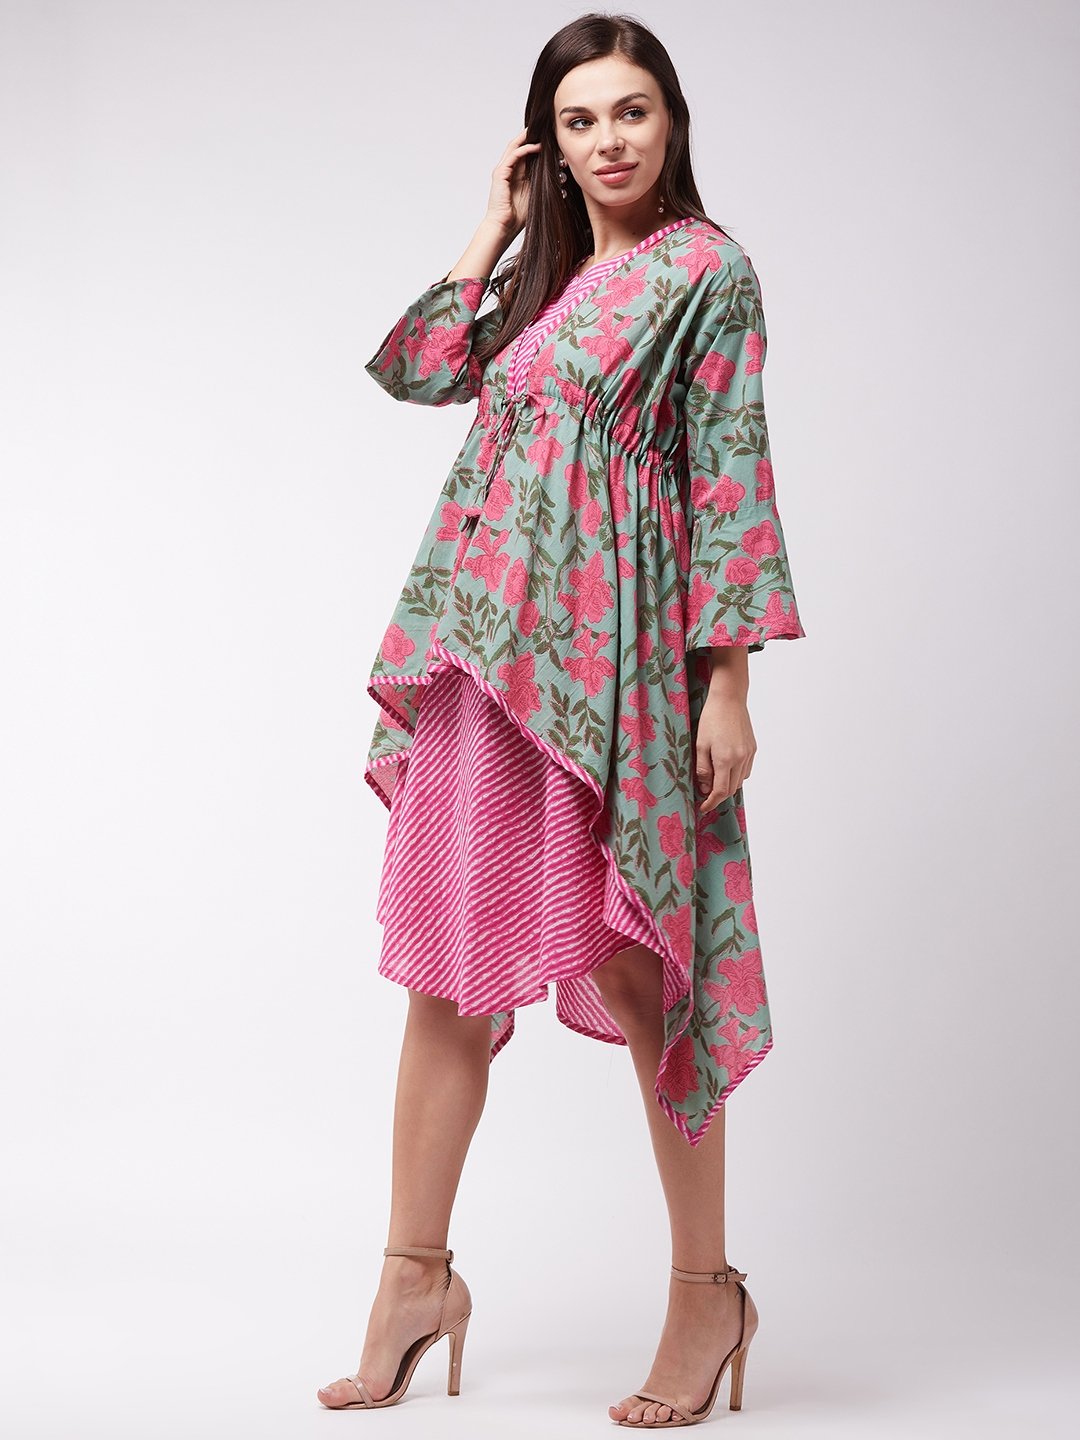 Green -Pink Floral Dress With Shrug